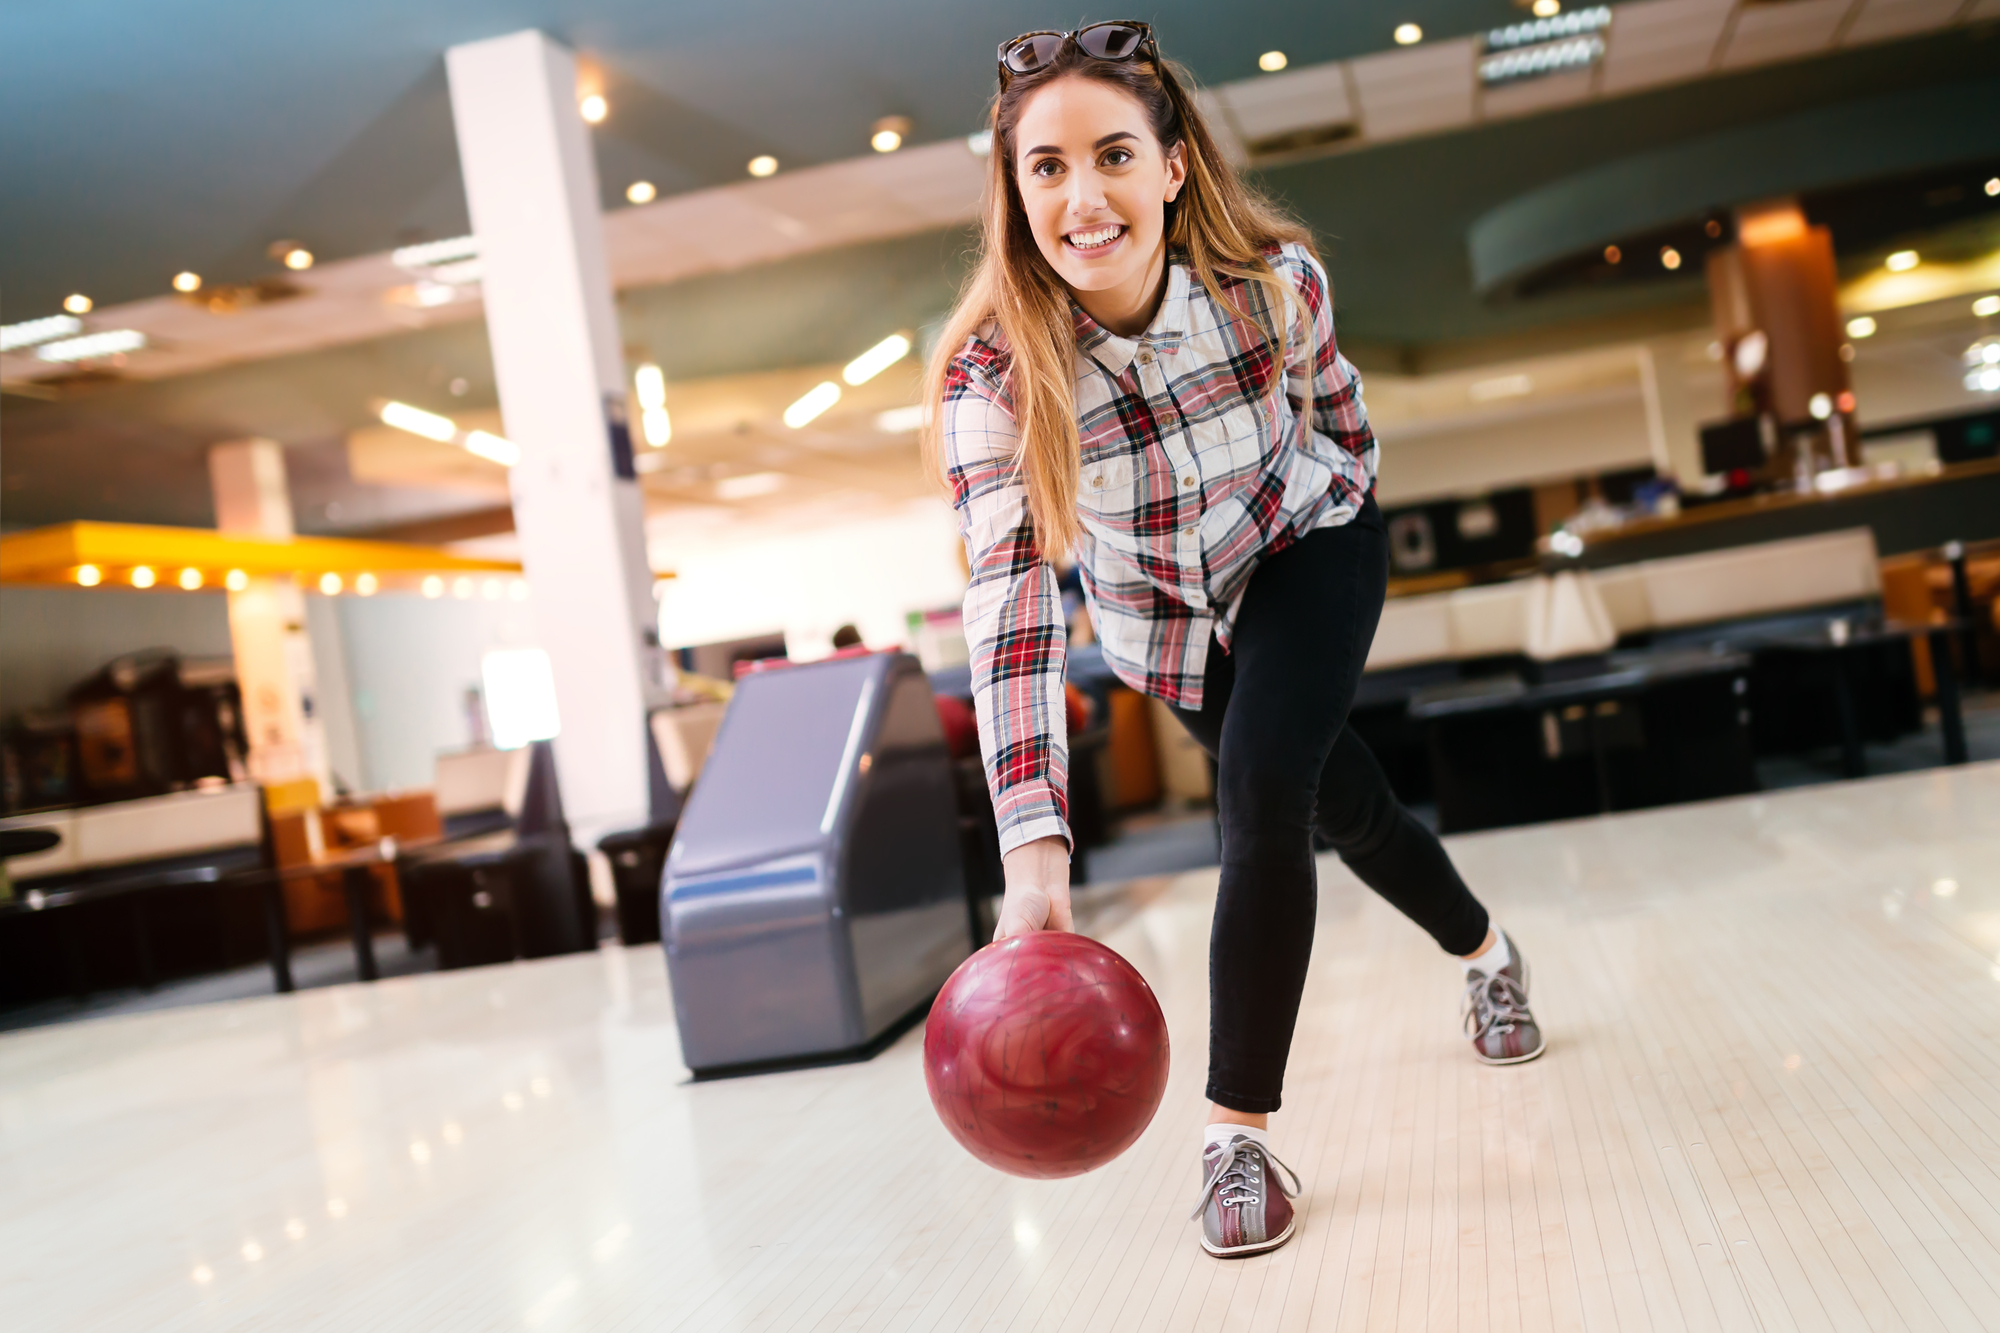 woman about to release a bowling ball